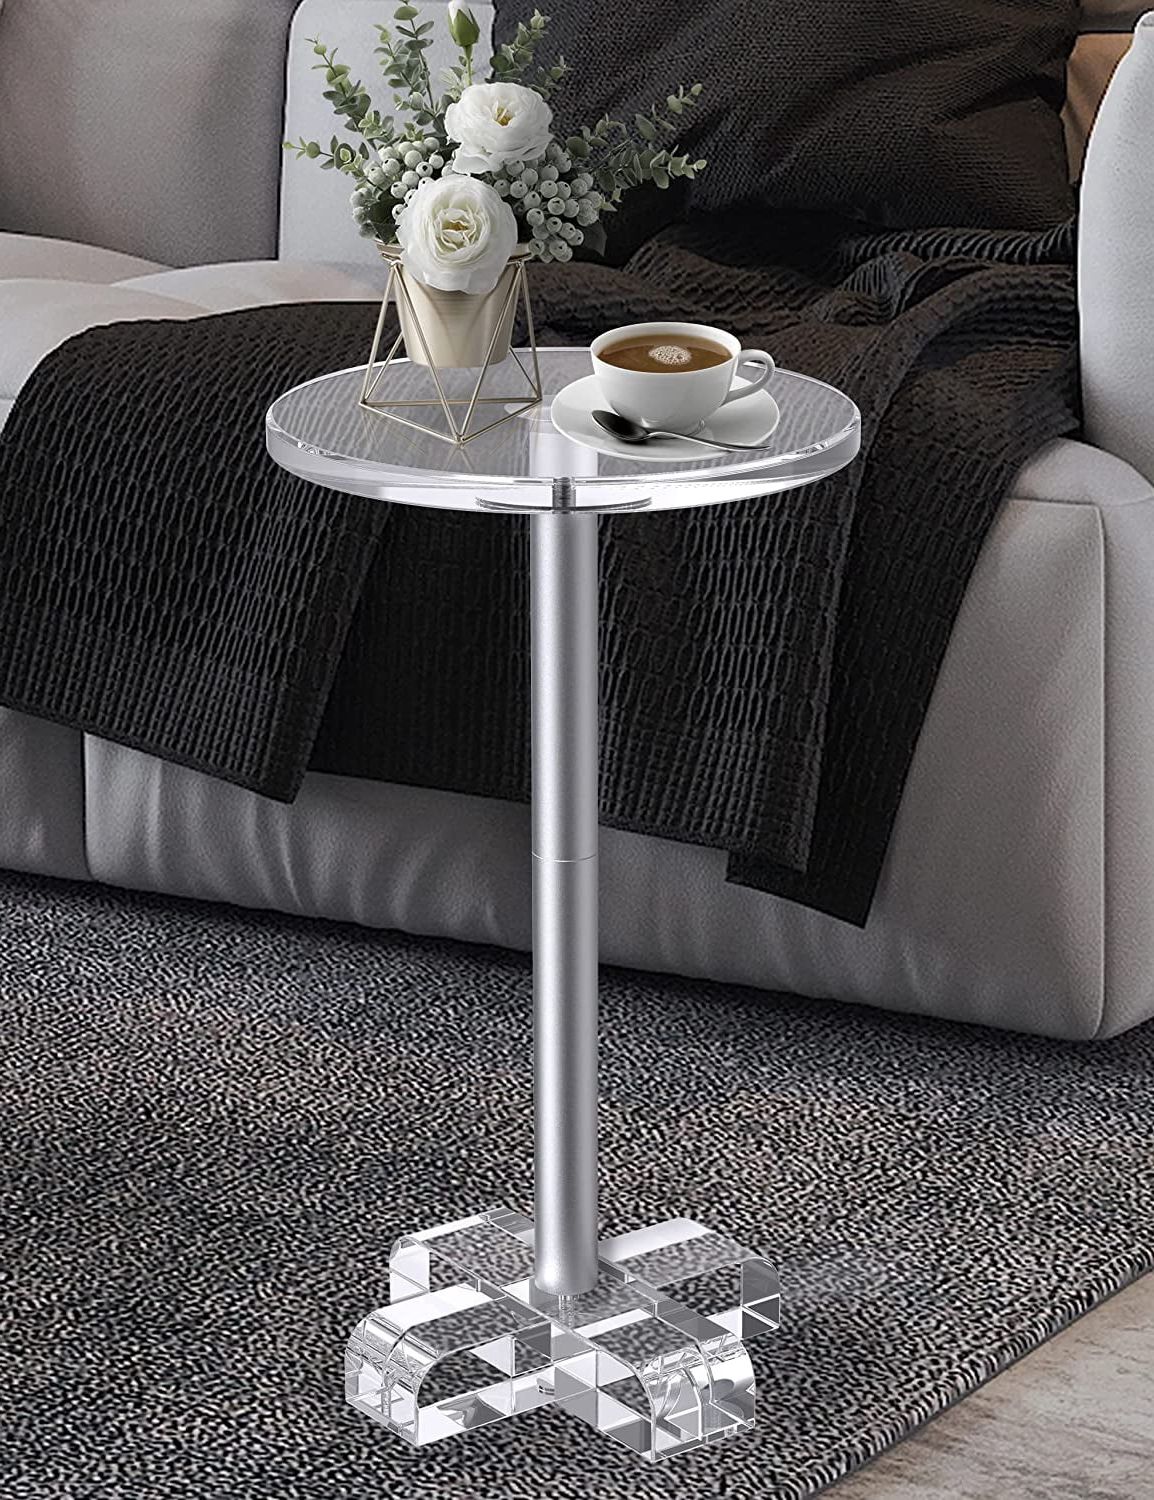 Newest Transparent Side Tables For Living Rooms With Regard To Acrylic Side Table, Musvoh Small Modern Round Transparent End Table With  Criss Cross Base – Walmart (View 7 of 10)